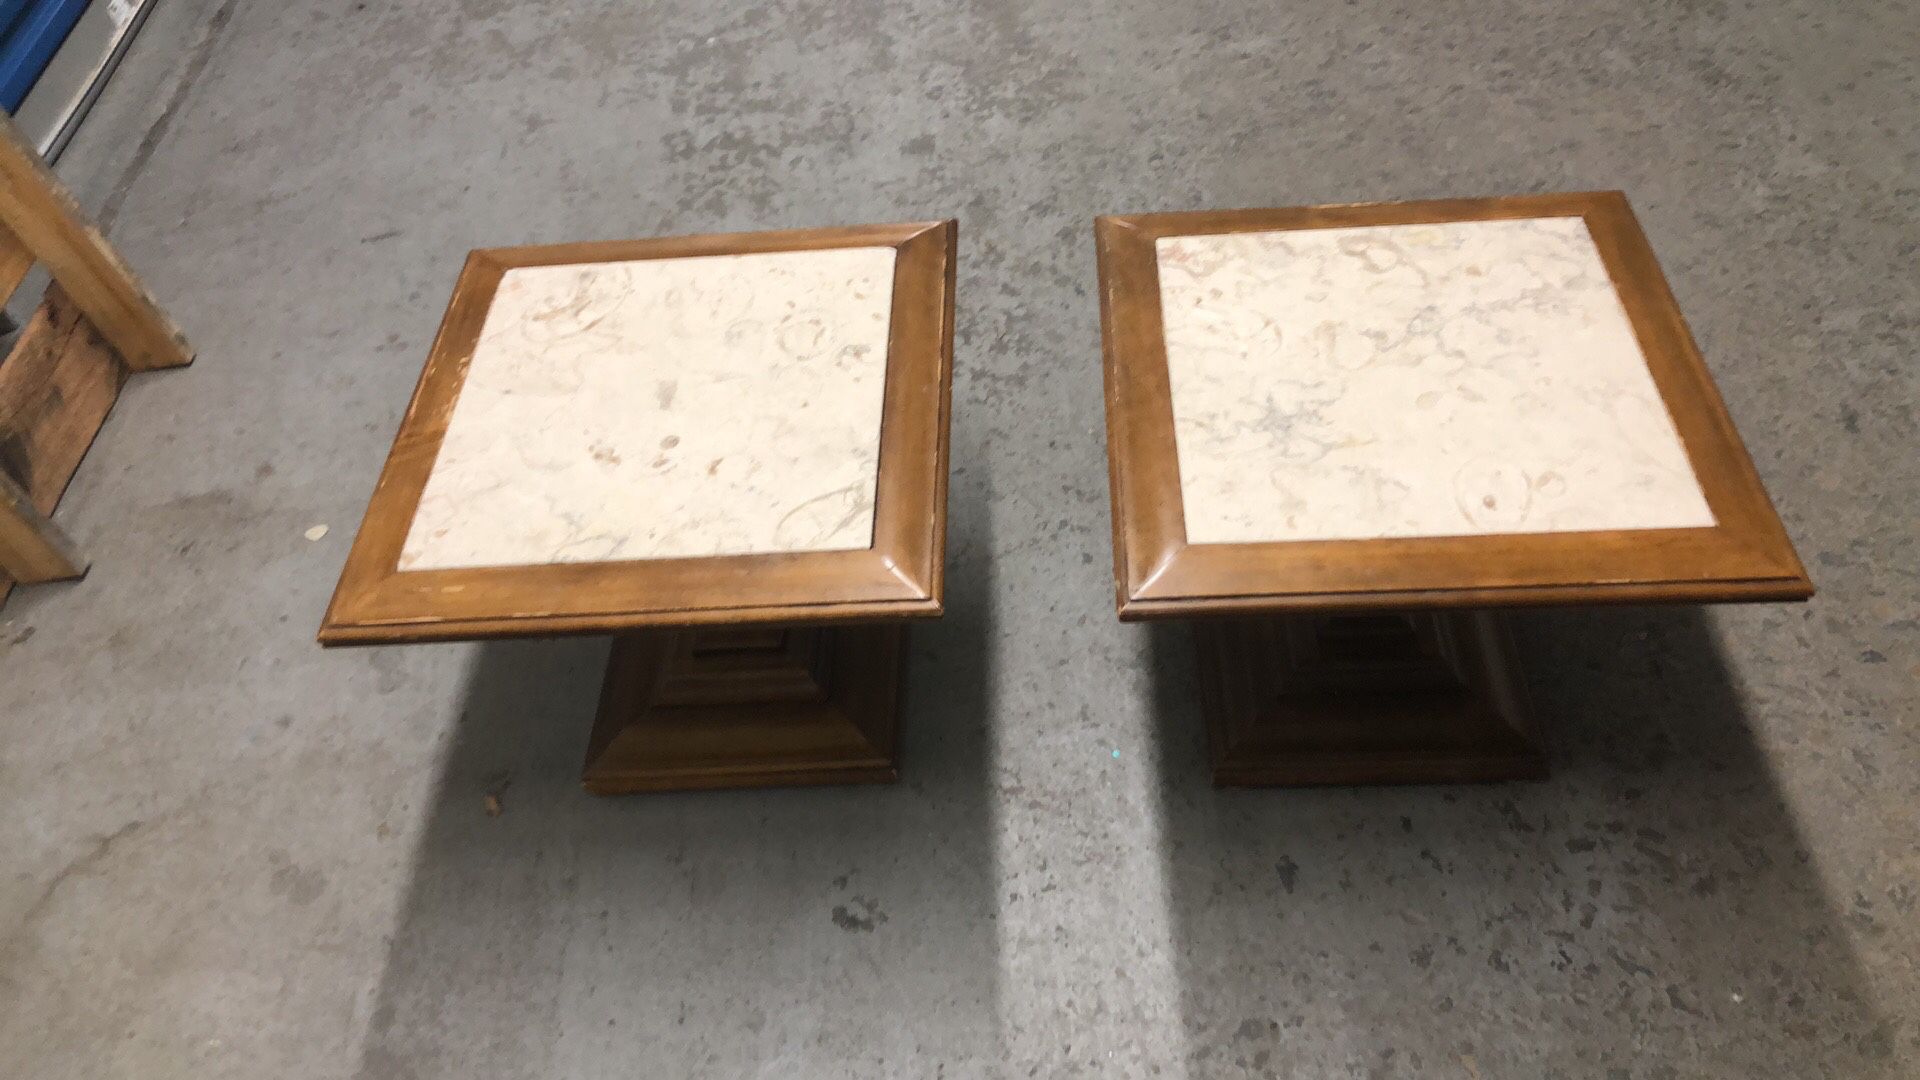 19”x19”x15”h  2. Marble Tables